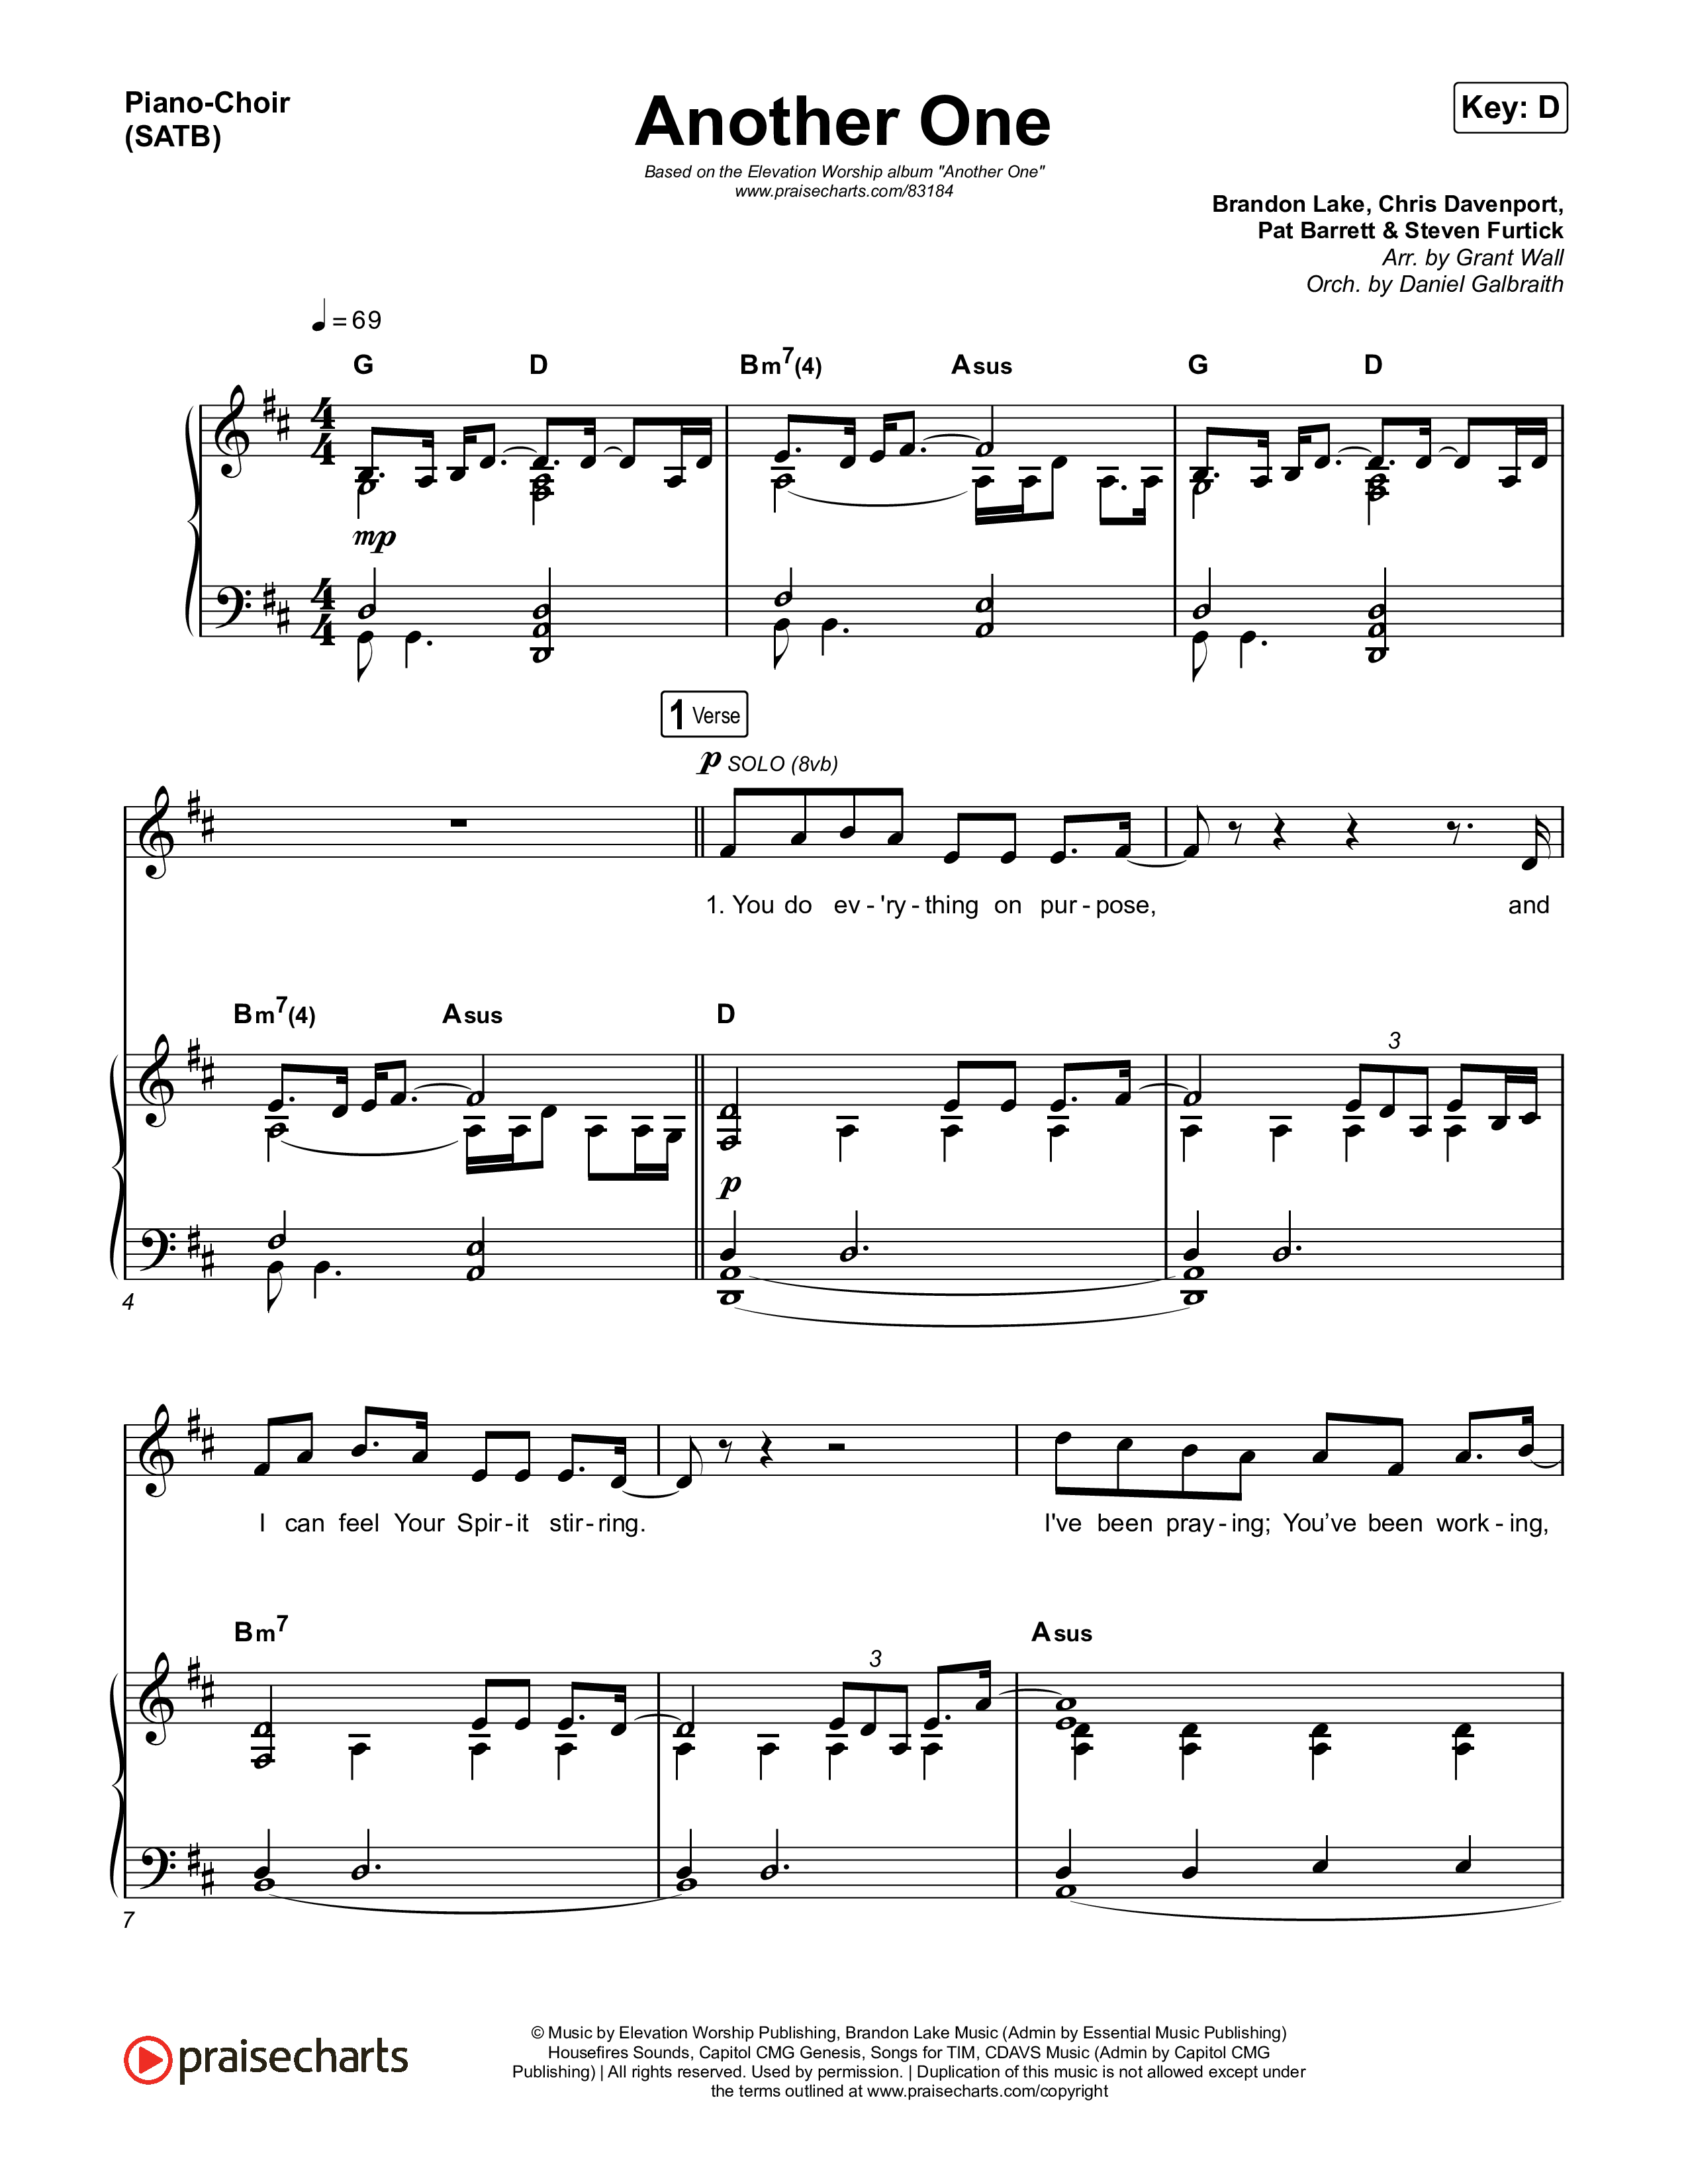 Another One Piano/Vocal (SATB) (Elevation Worship)